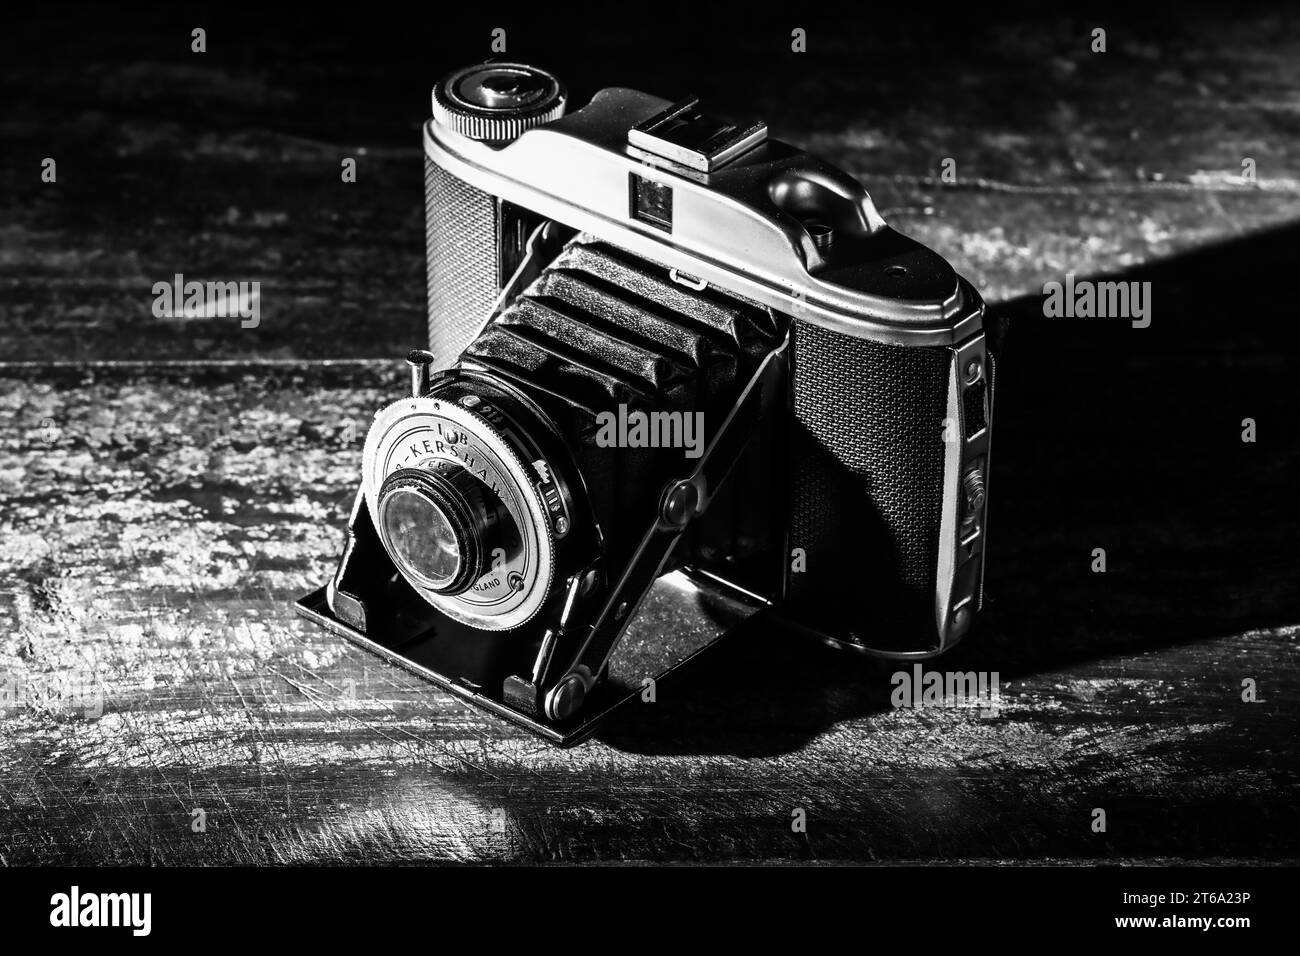 Bellows camera Black and White Stock Photos & Images - Alamy